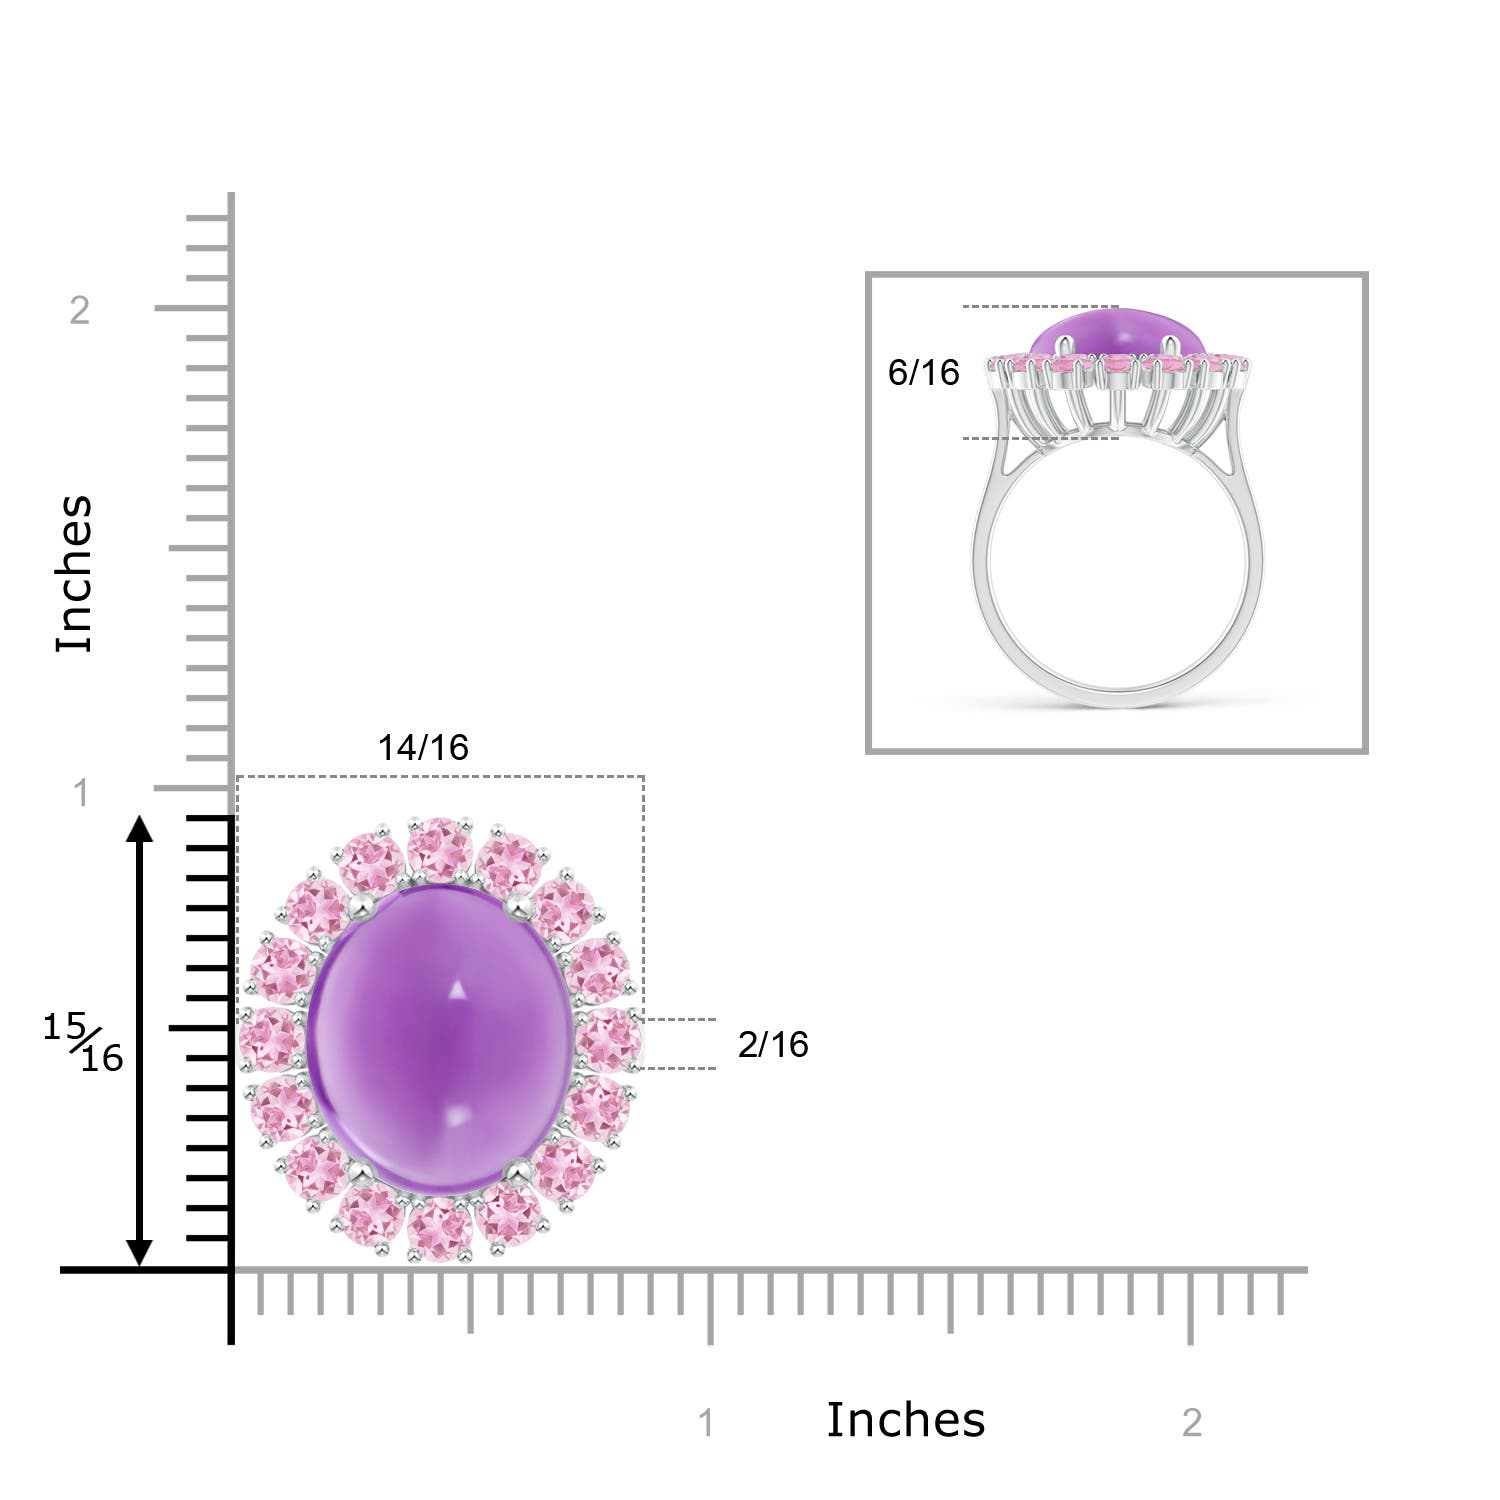 A - Amethyst / 13.56 CT / 14 KT White Gold